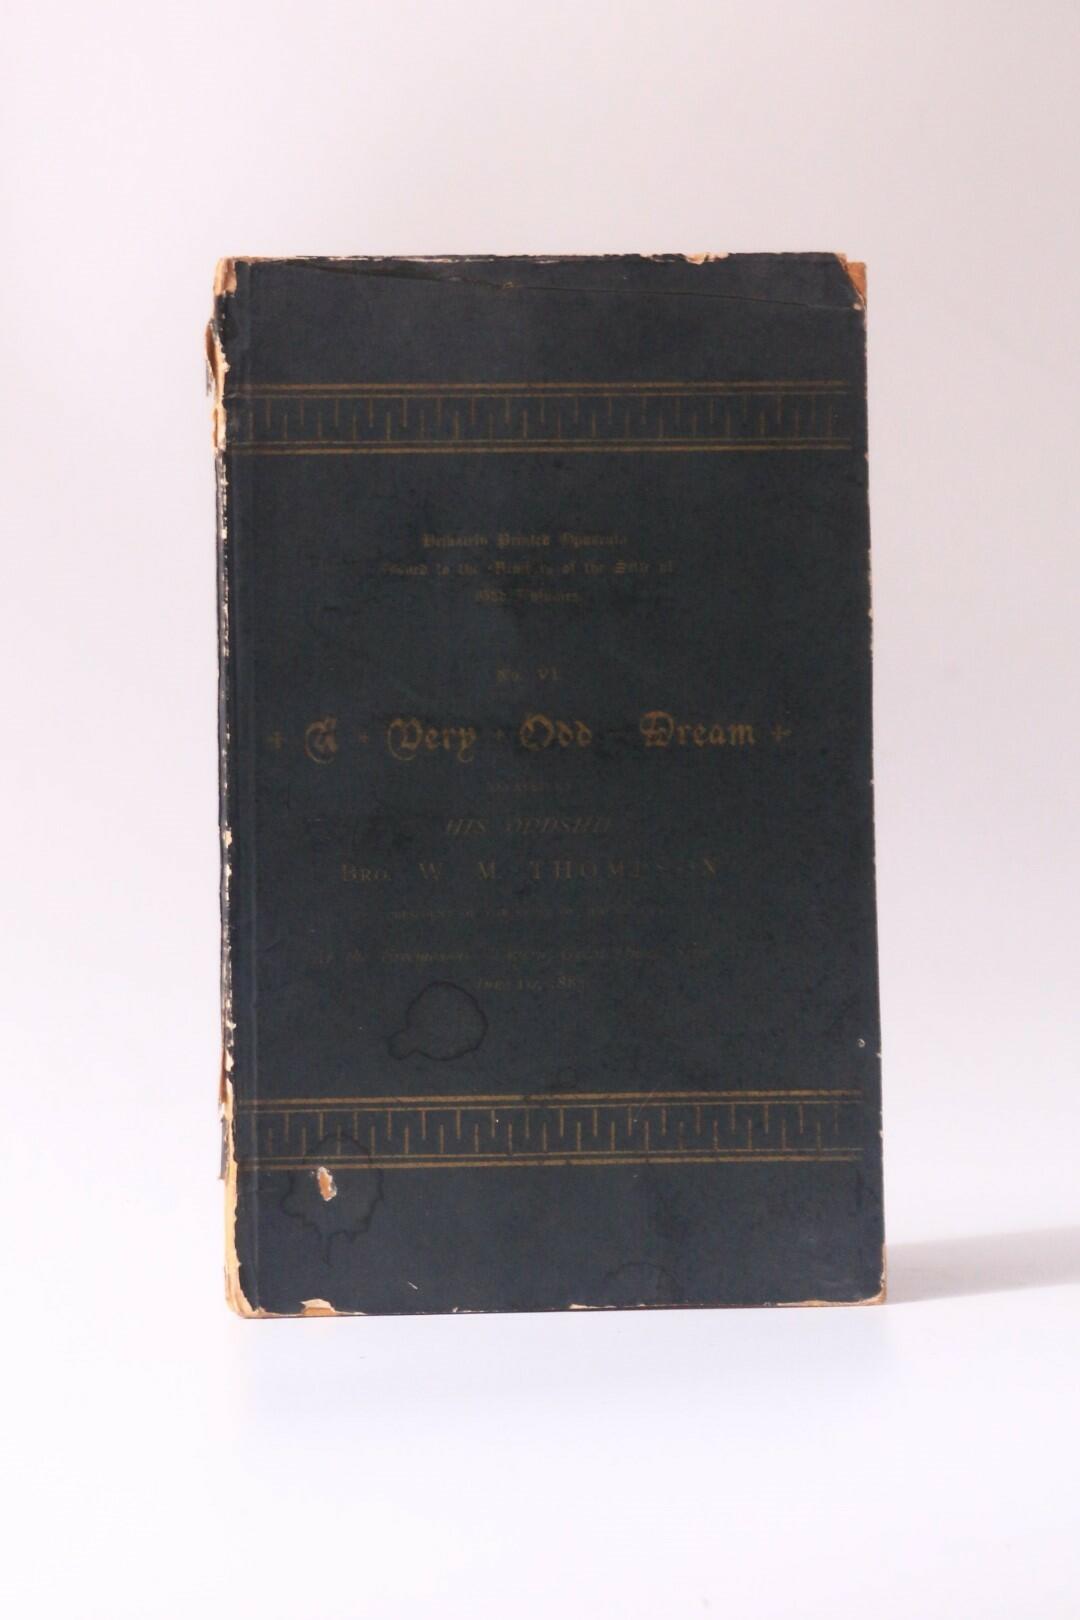 W.M. Thompson - A Very Odd Dream Related to His Oddship Bro W M Thompson President of the Sette of Old Volumes at the Freemason's Tavern, Great Queen Street, on June 1st, 1882 - C.W.H. Wyman, 1883, First Edition.